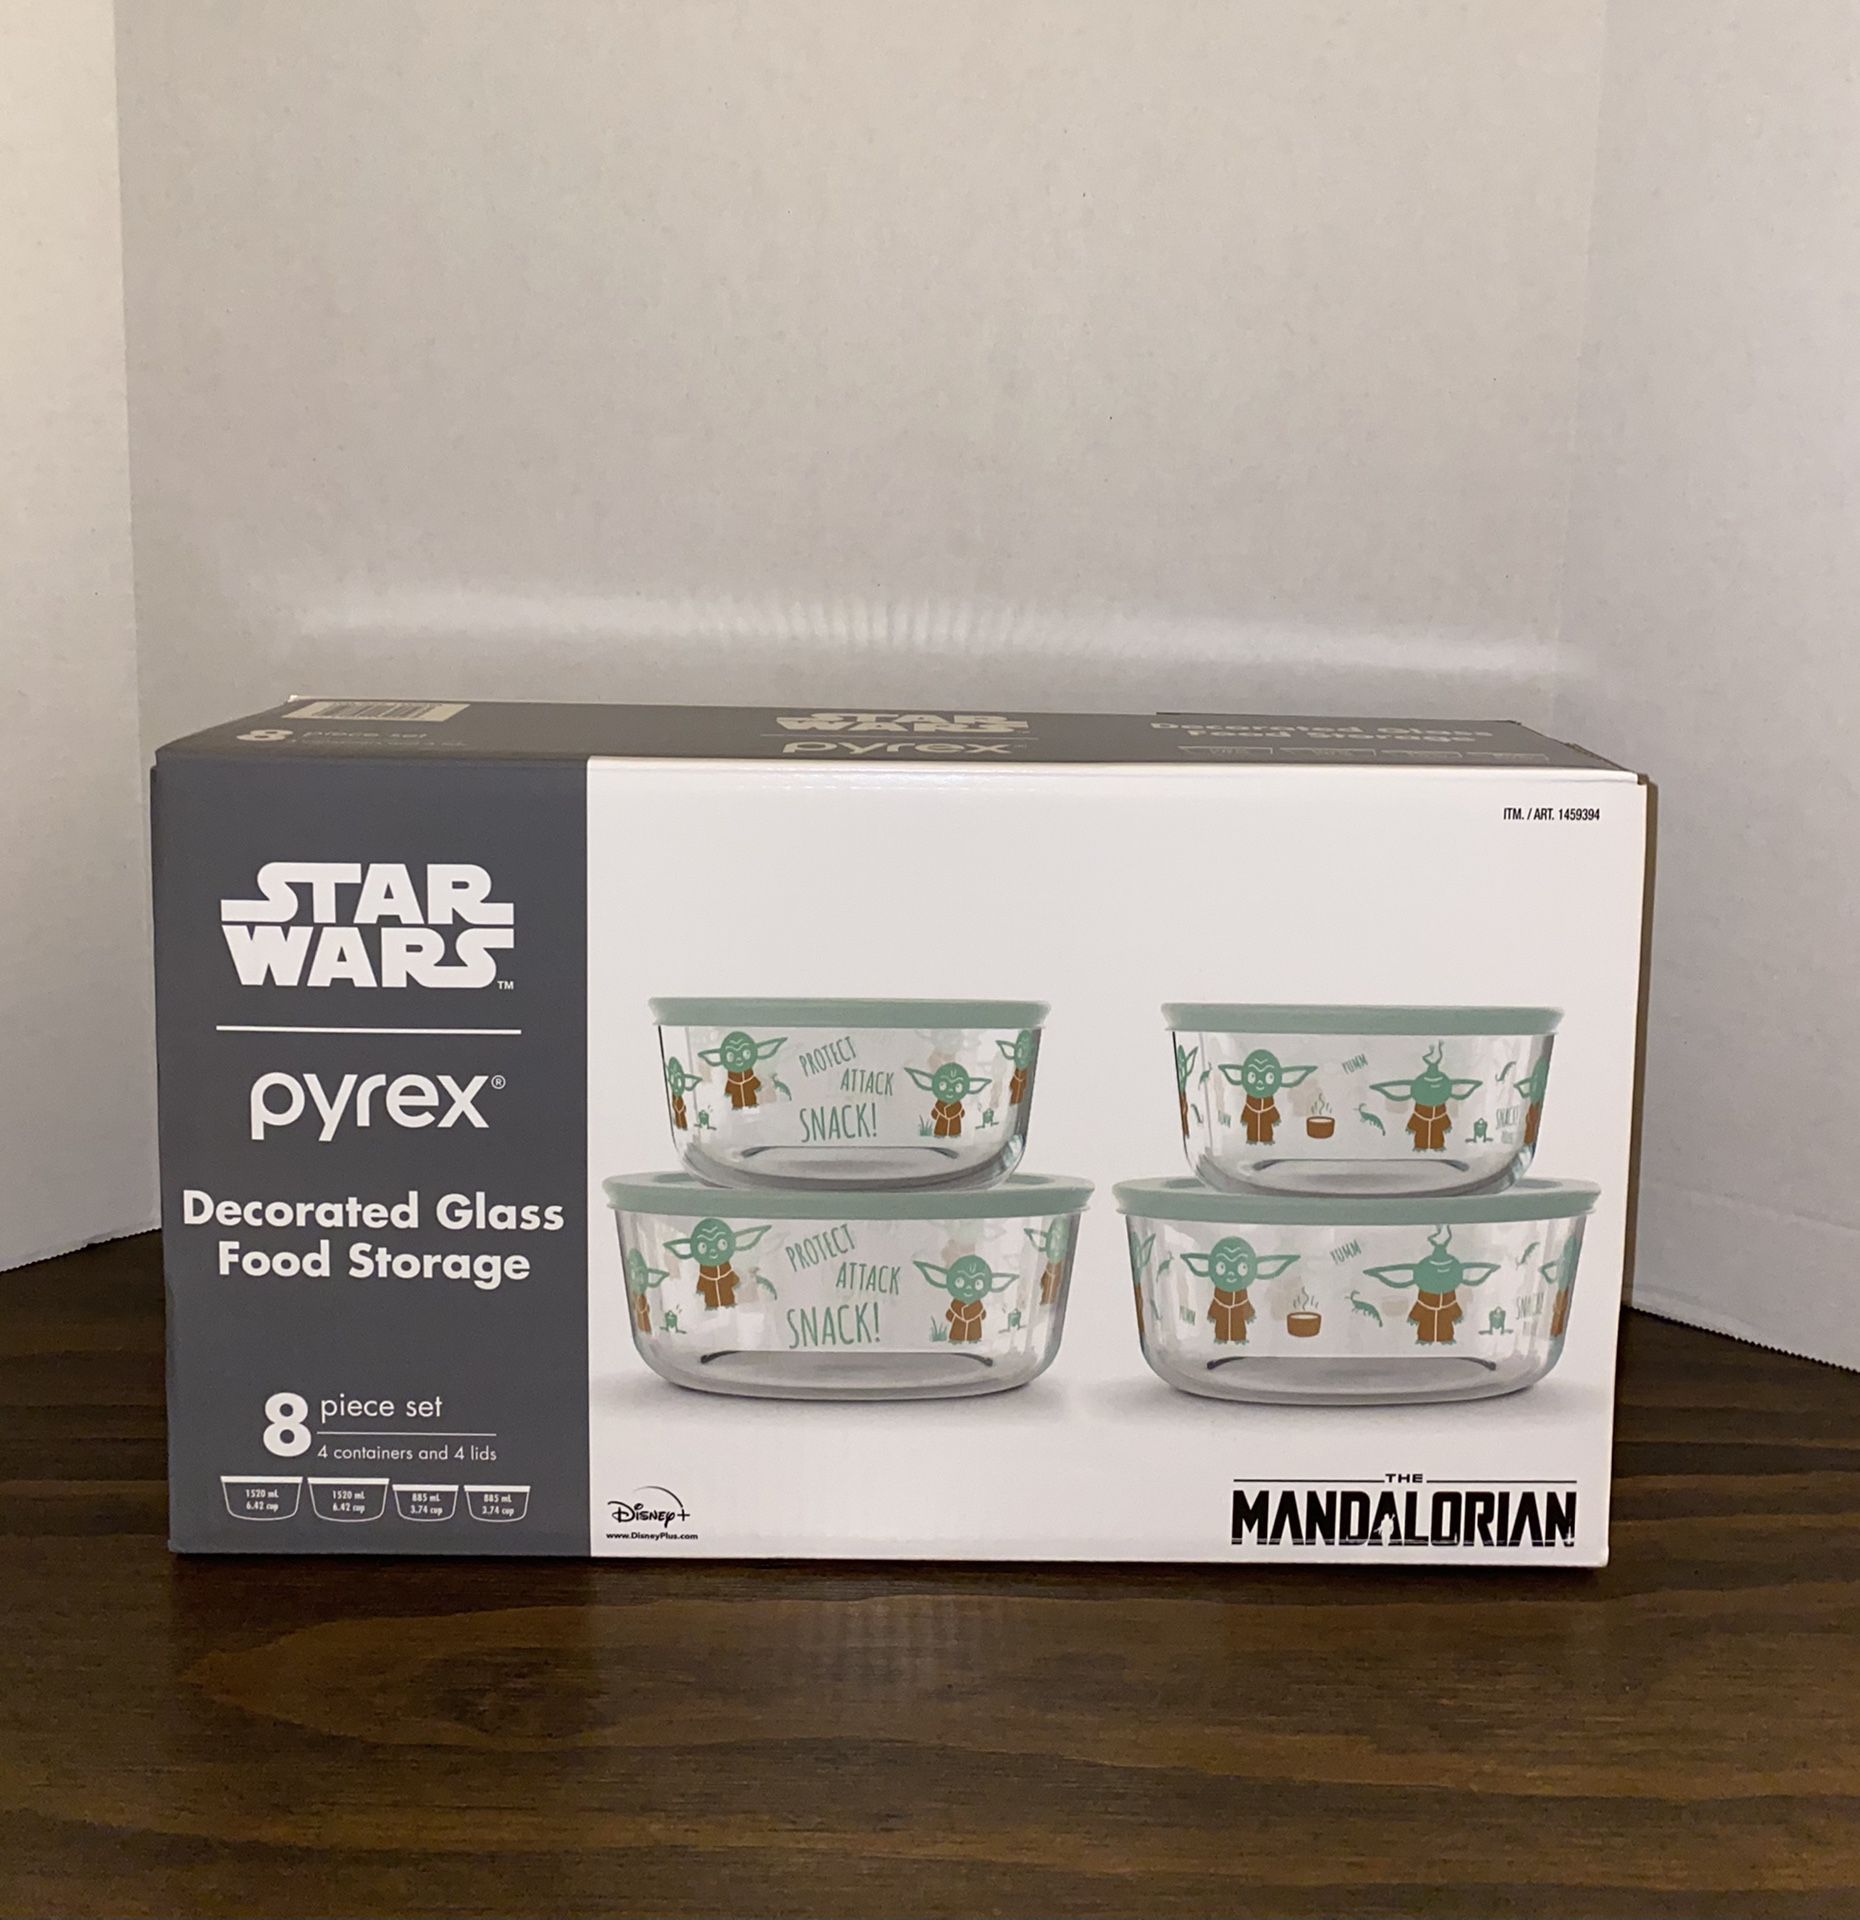 STAR WARS BABY YODA MADALORIAN 8 PCS SET DECORATED GLASS COLLECTABLE